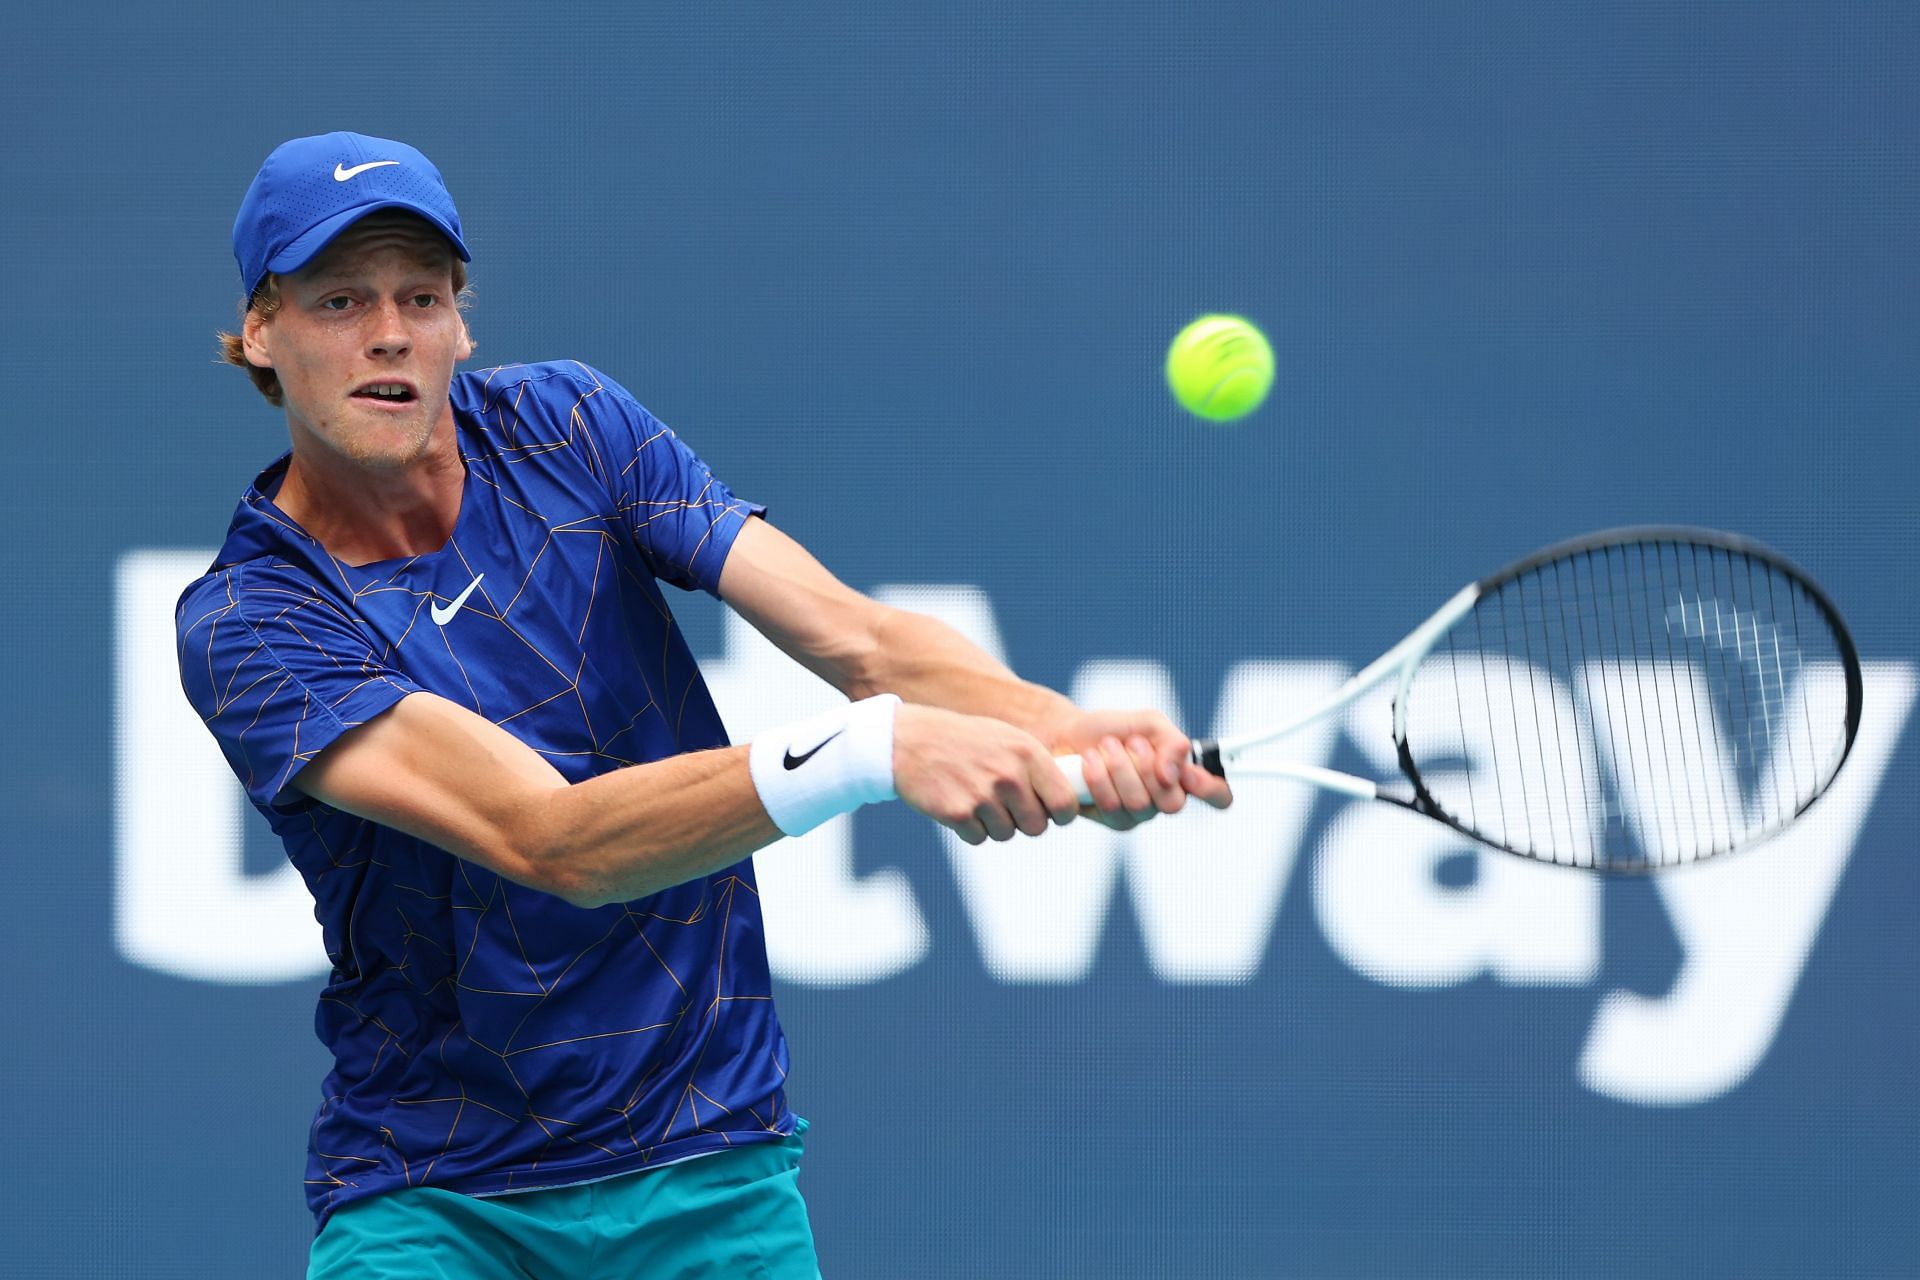 Jannik Sinner will look to book his place in the quarterfinals of the Canadian Open